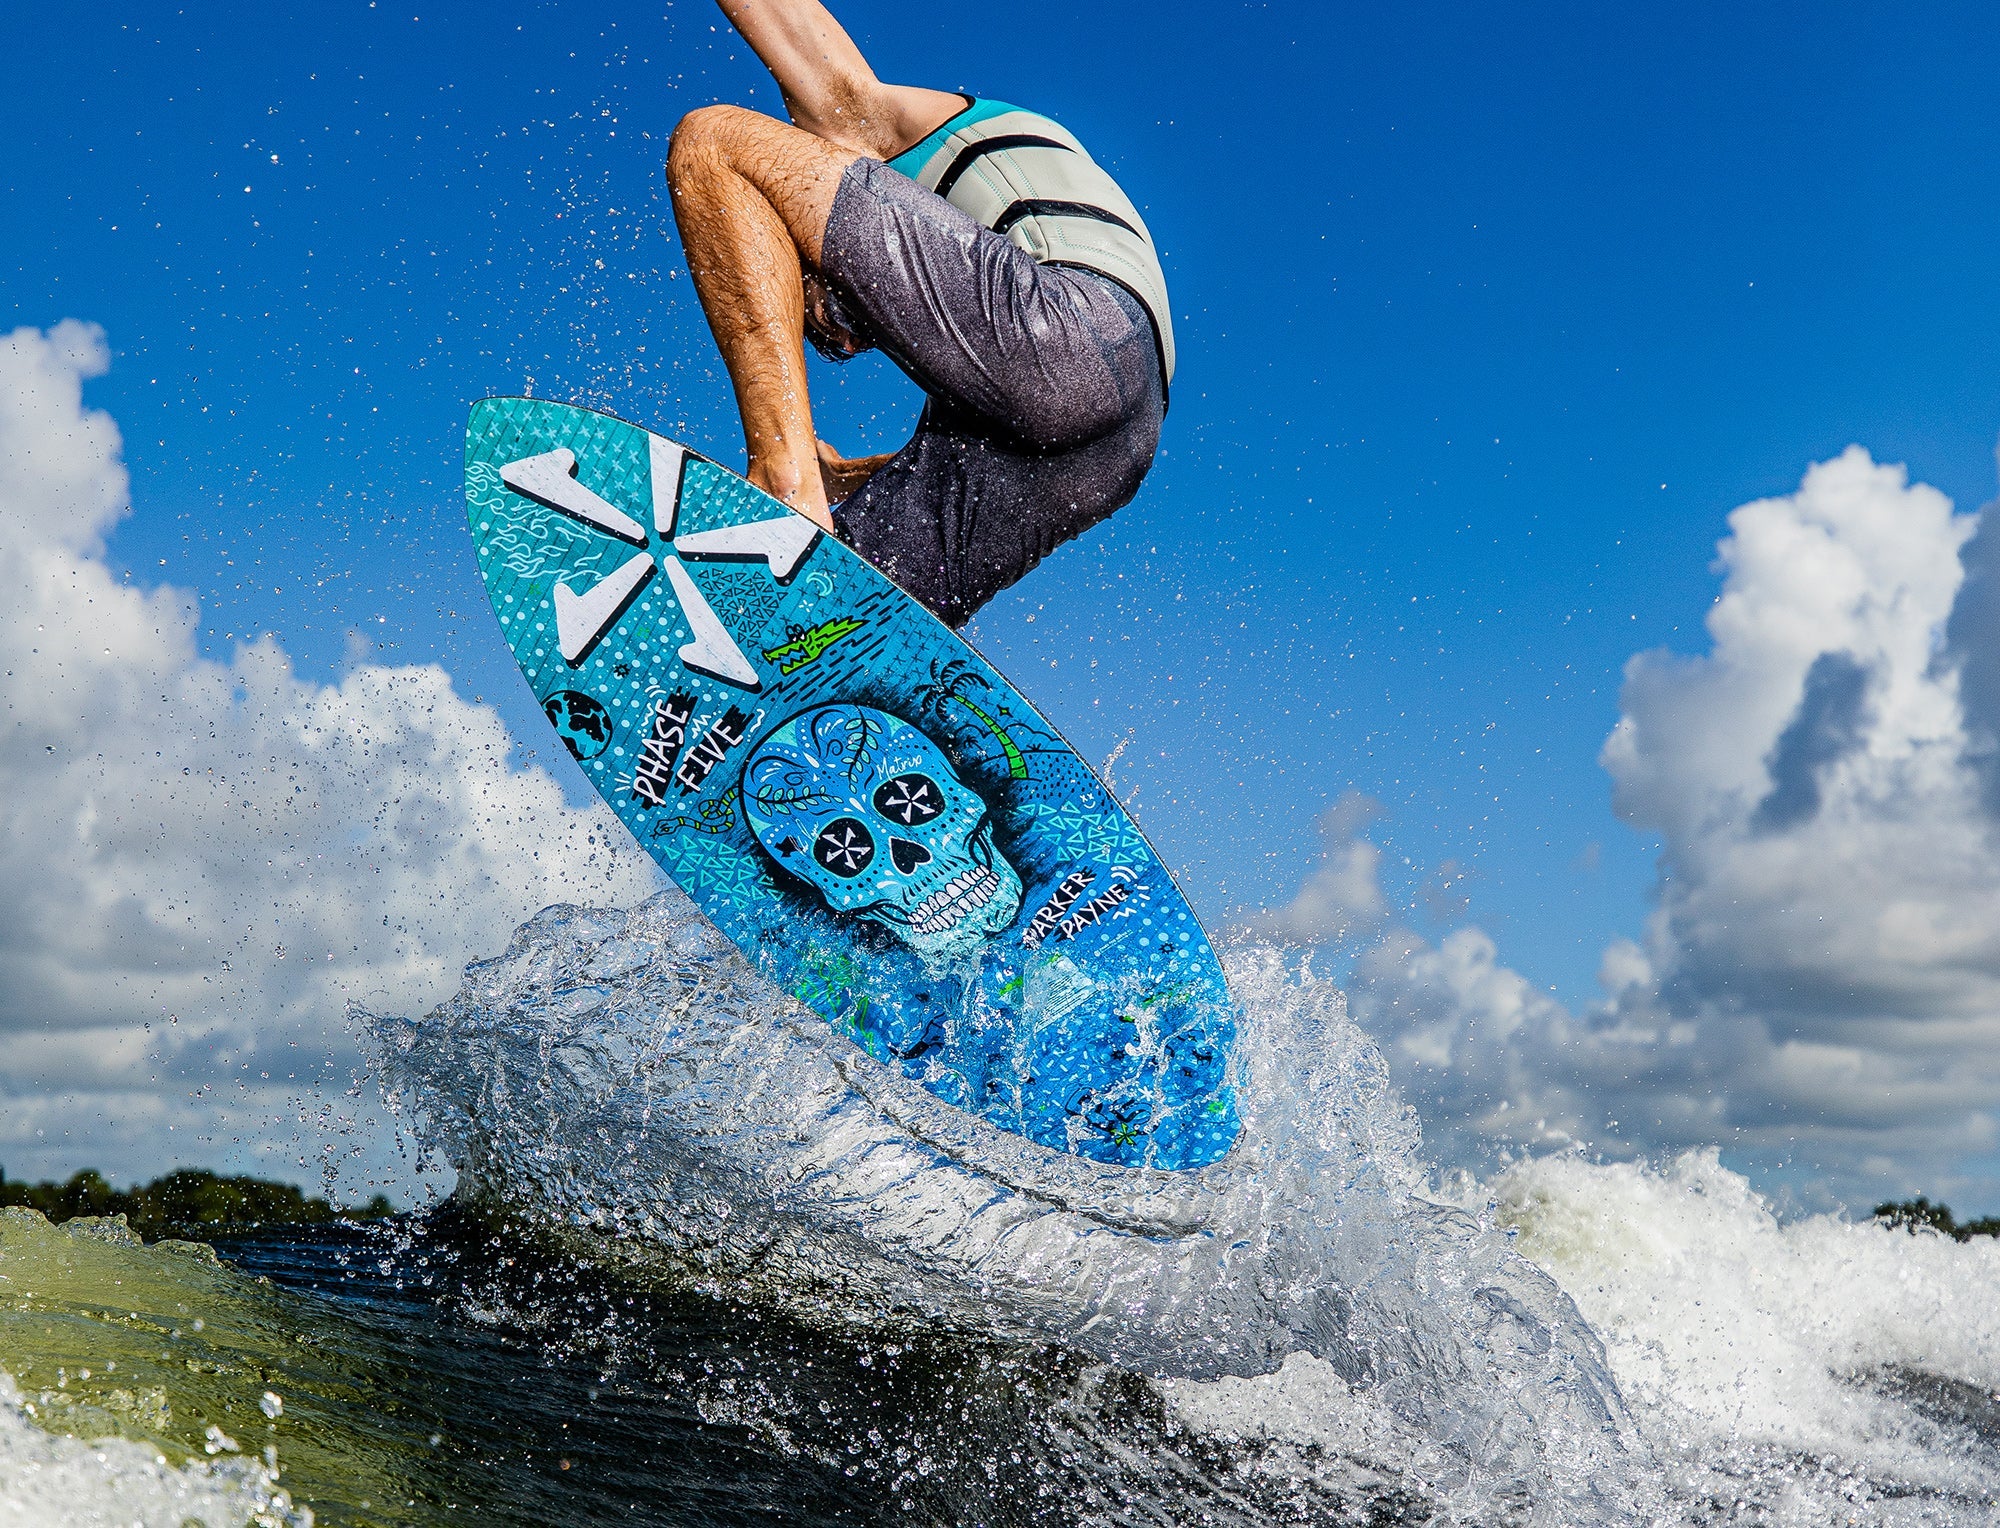 A man is riding a Phase 5 Matrix Payne Pro Wakesurf Board in the water, showcasing his impeccable Skim Style skills.